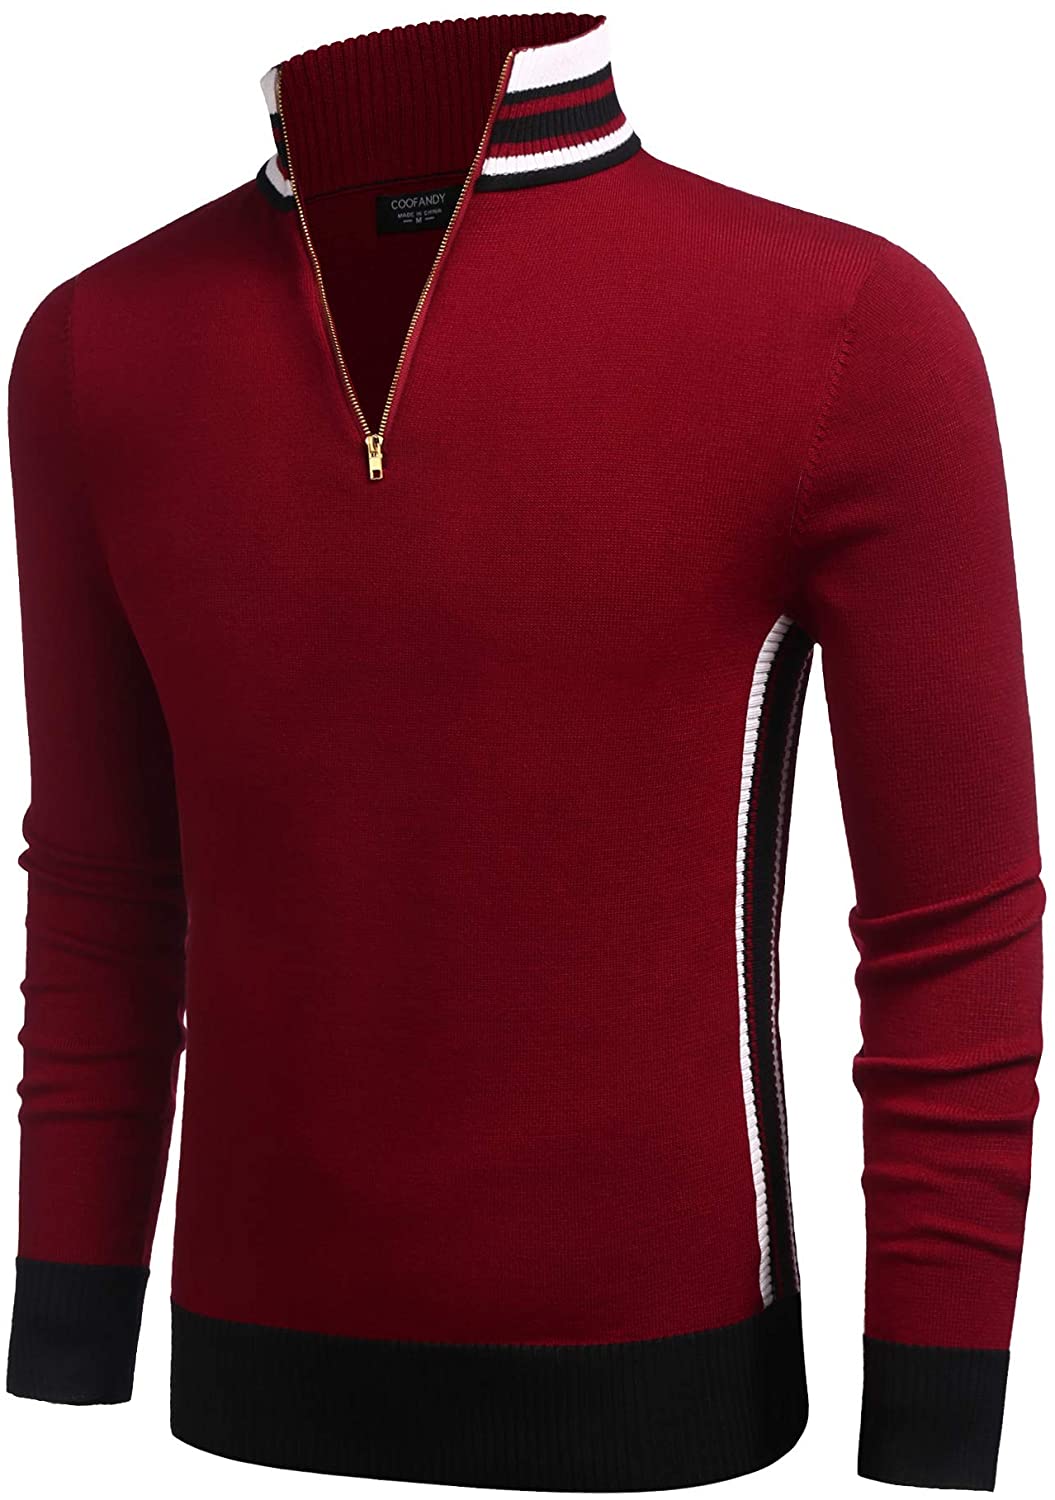 Men's Slim Fit Red Quarter Zip Pullover Polo Sweater